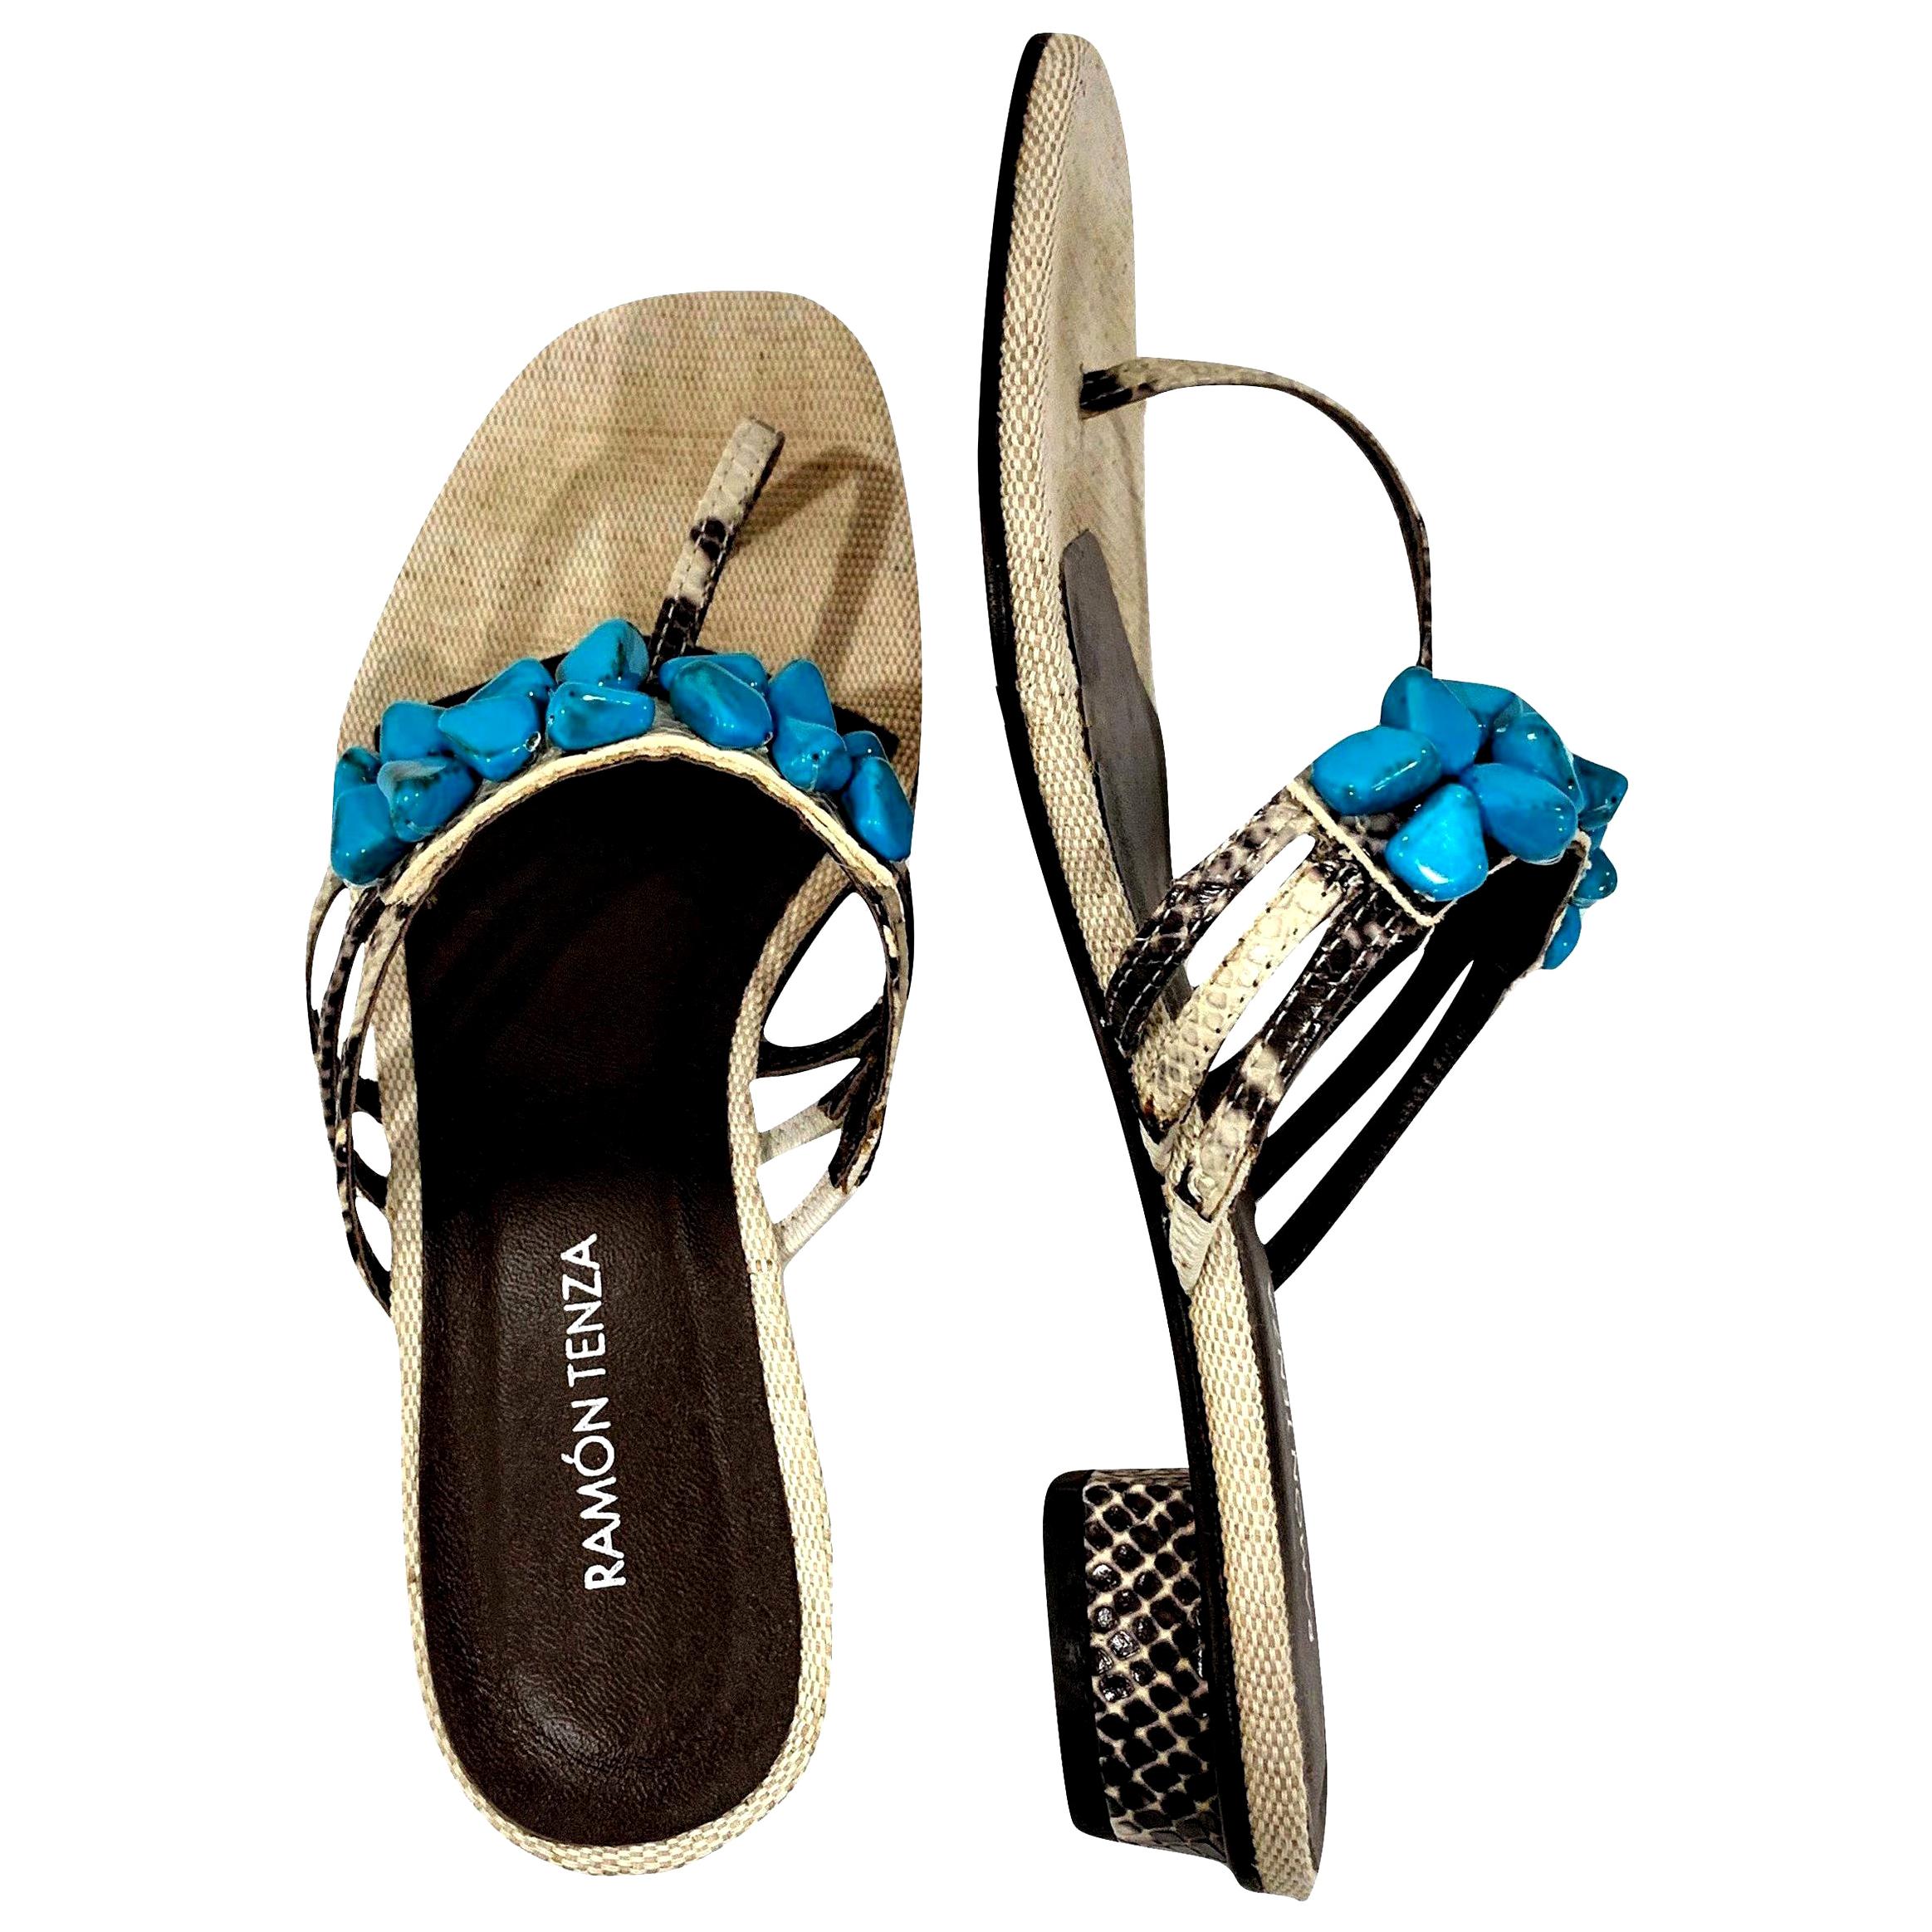 Ramon Tenza Spain
Brand New
Beige & Turquoise Thong Sandals
* Padded Leather Footbed
* Snakeskin Heel & Strap
* Faux Turquoise Beading
* Size: 9.5
* 1.25